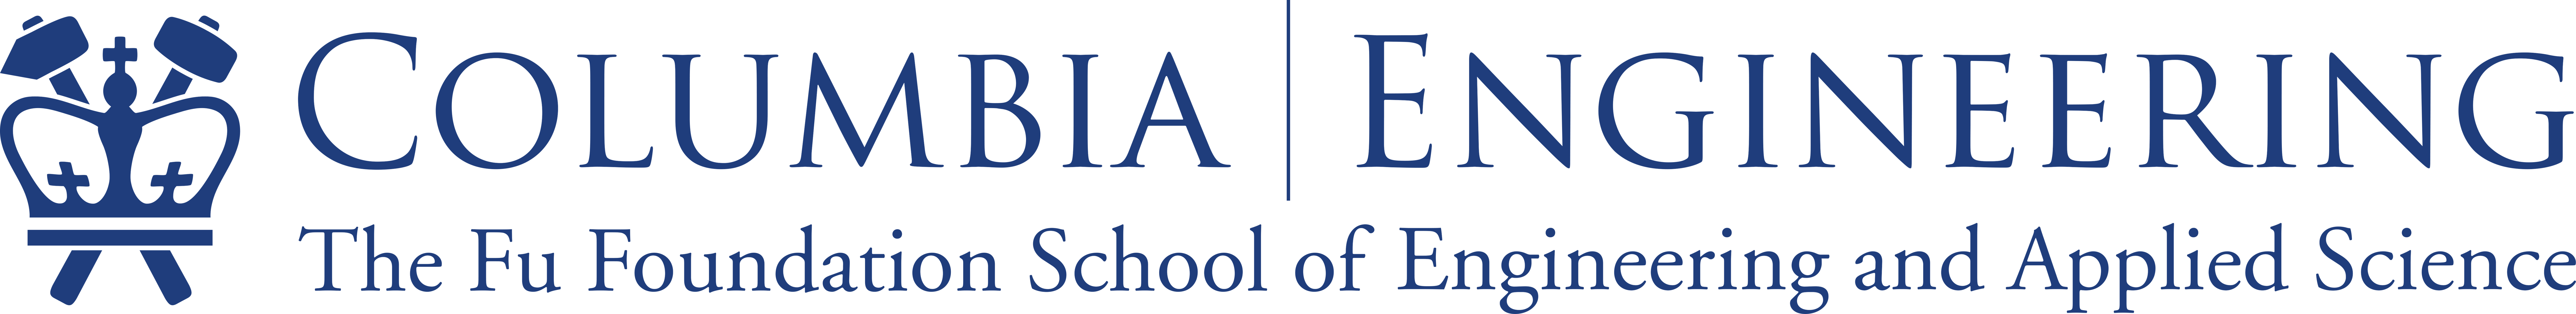 Columbia University School of Engineering and Applied Science